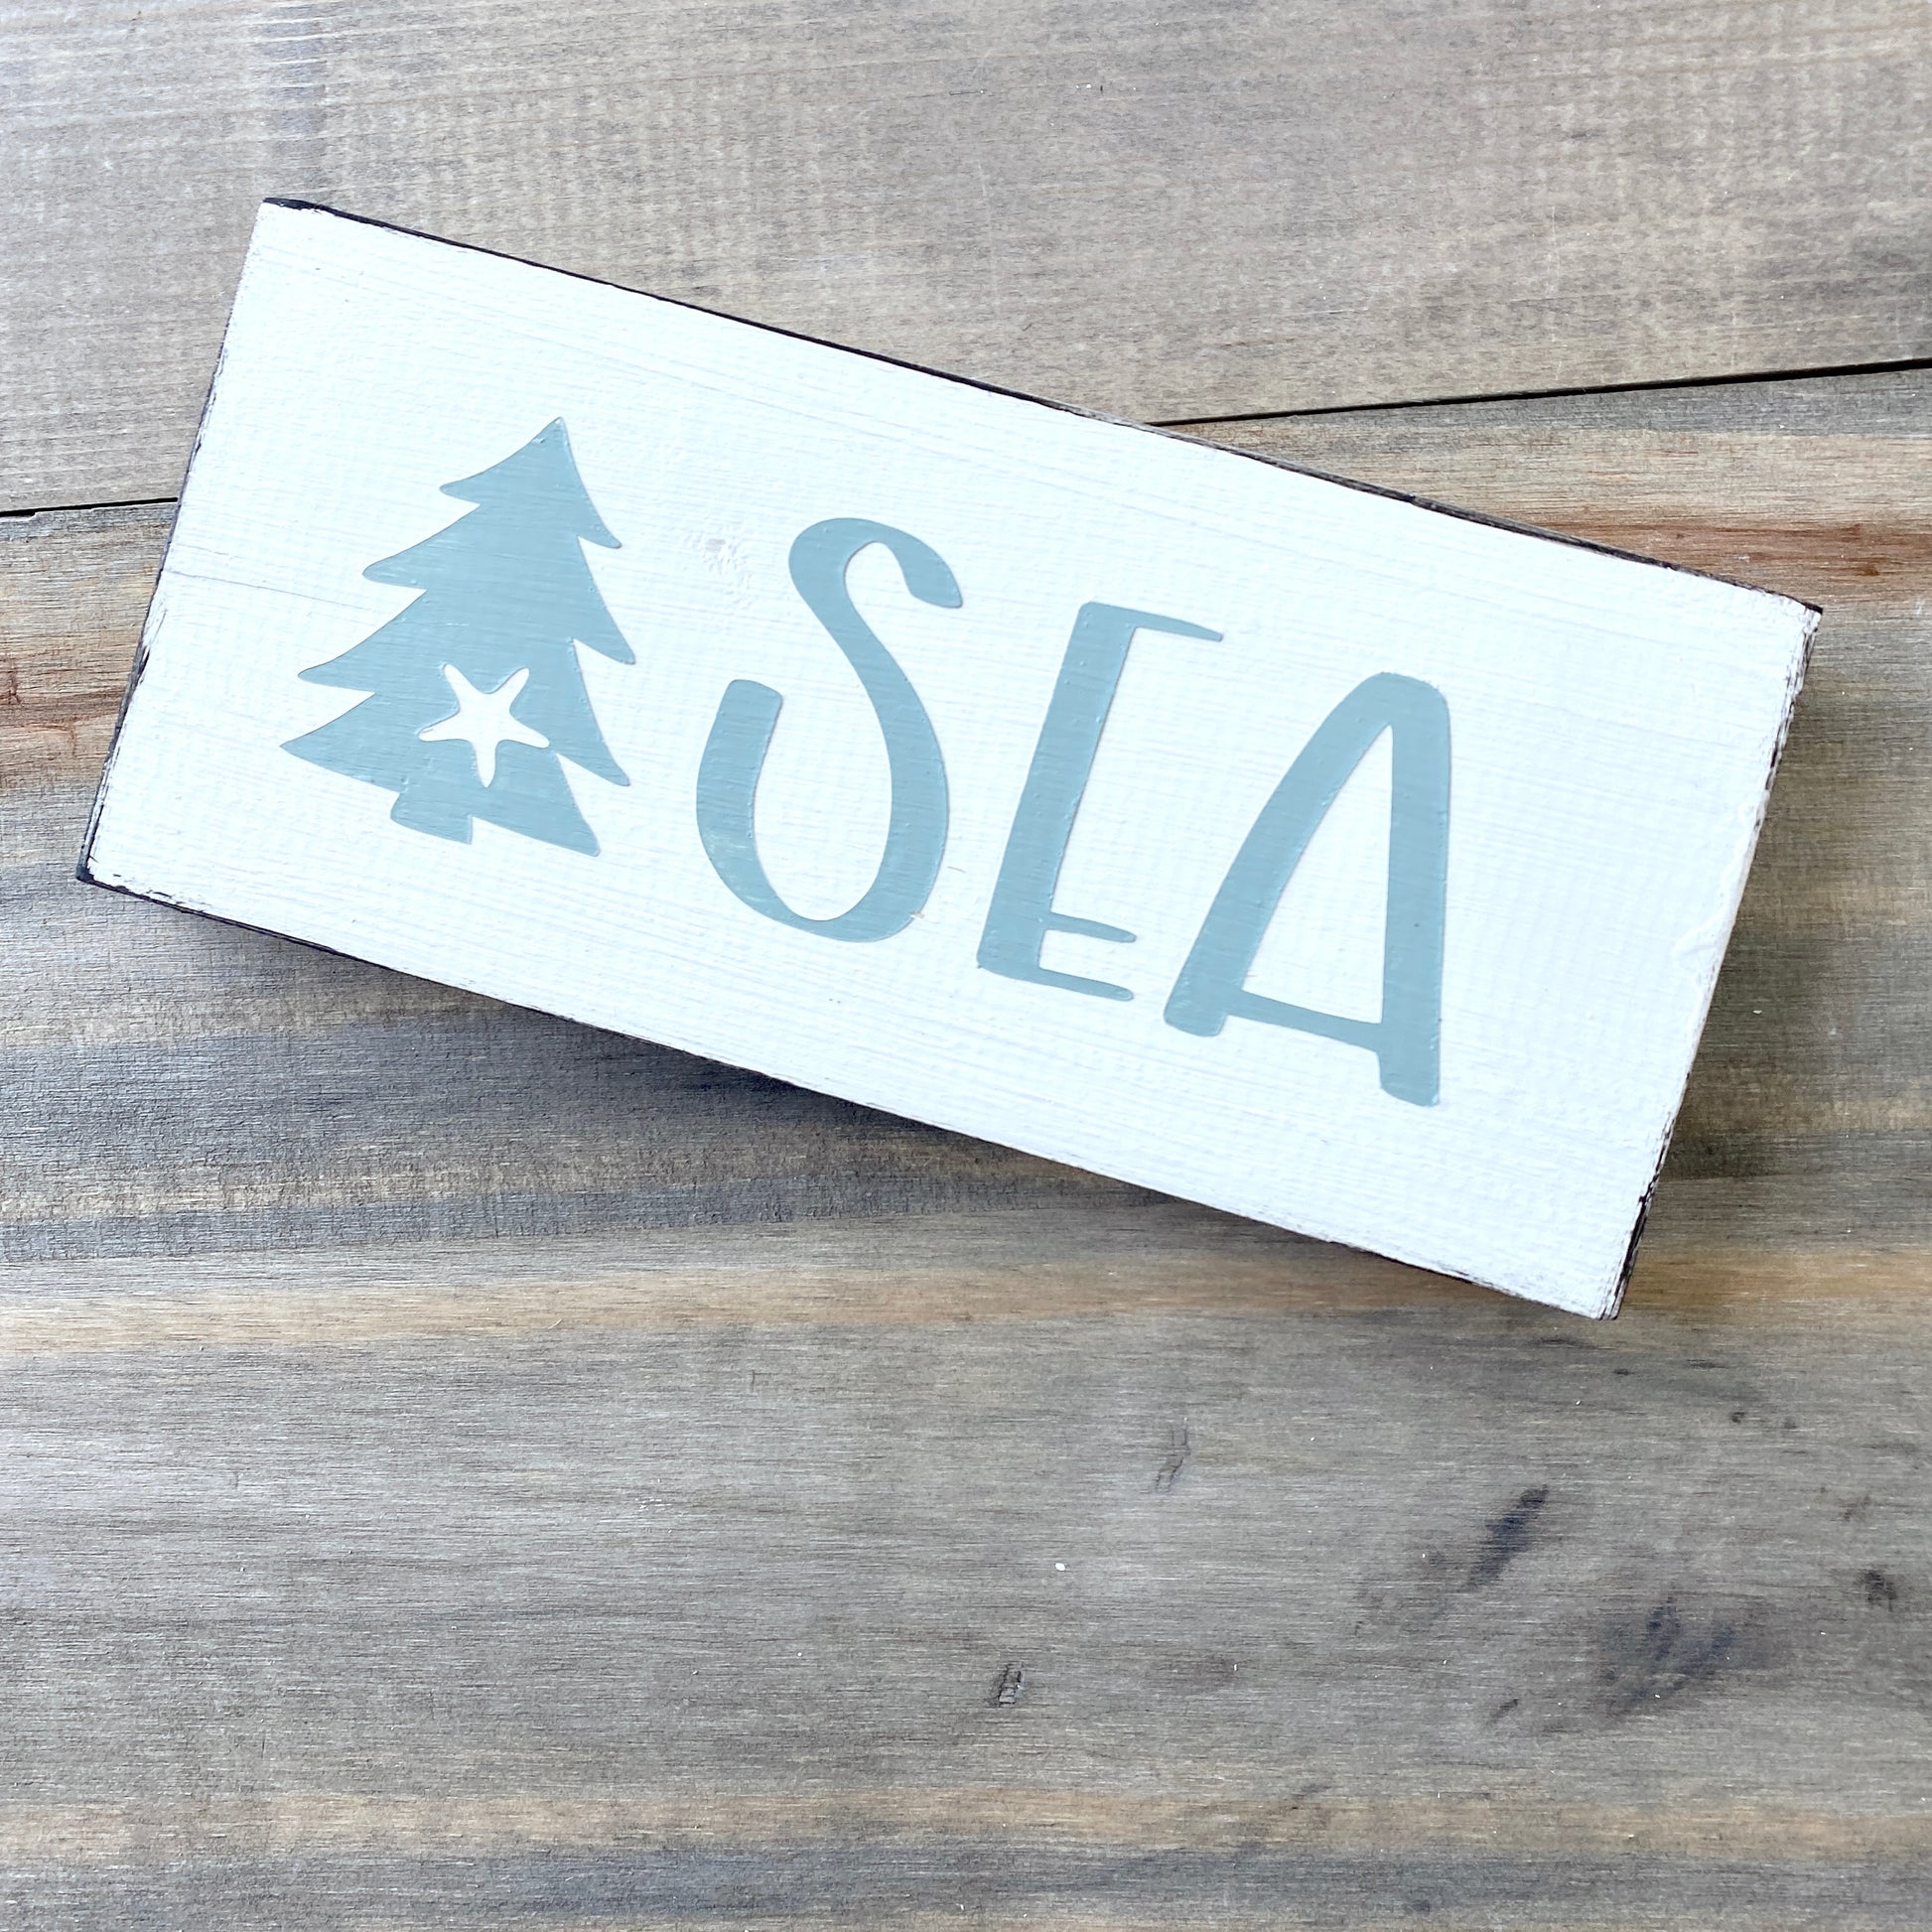 Coastal Christmas Decor, Anchored Soul Designs Sea Christmas wood sign with small tree and starfish white background with sage green design, beach house holiday decor coastal design